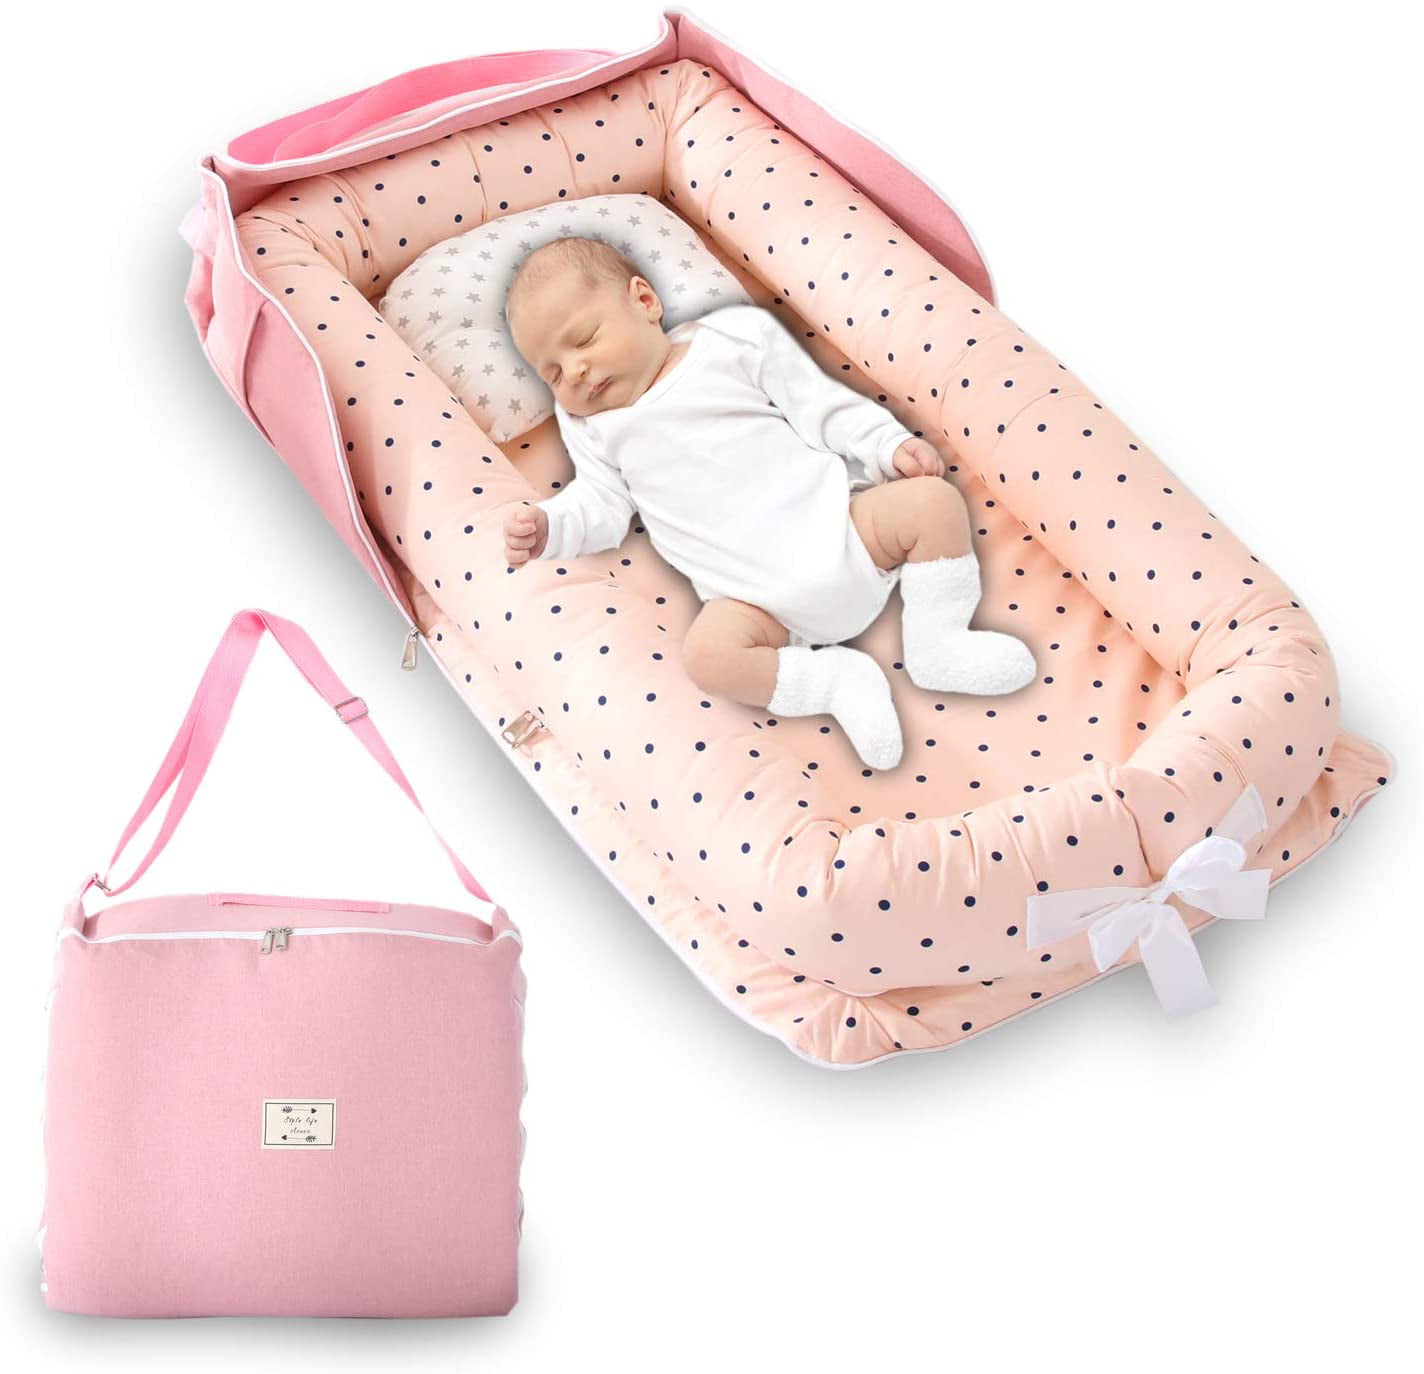 Baby nest bed Co sleeping baby bassinet 